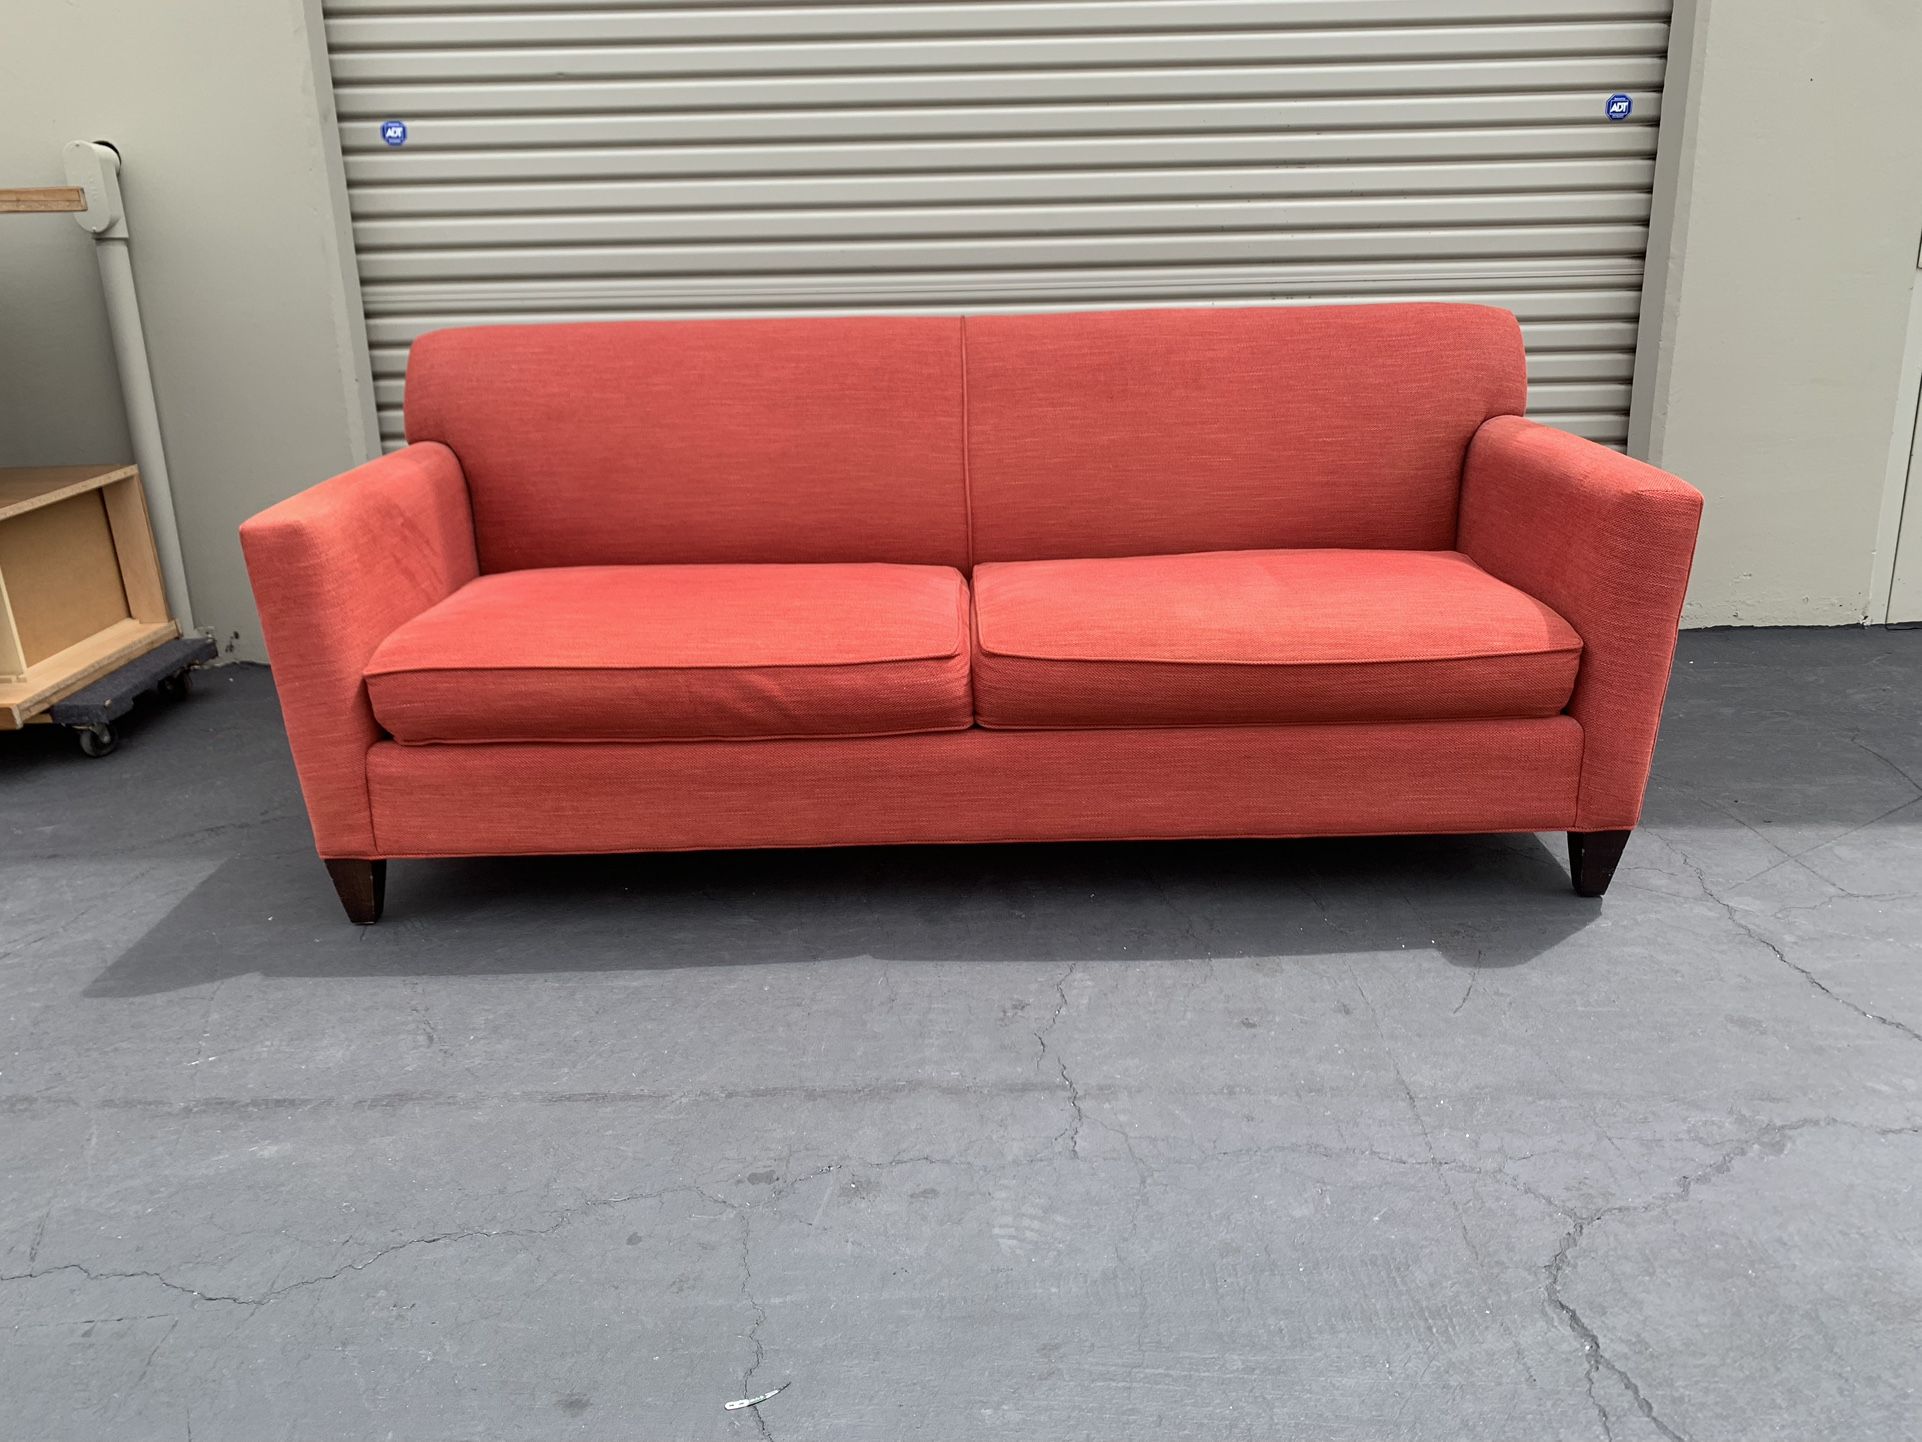 Crate & Barrel Cardinal Red Hennessy Sofa Clean and Good Condition 